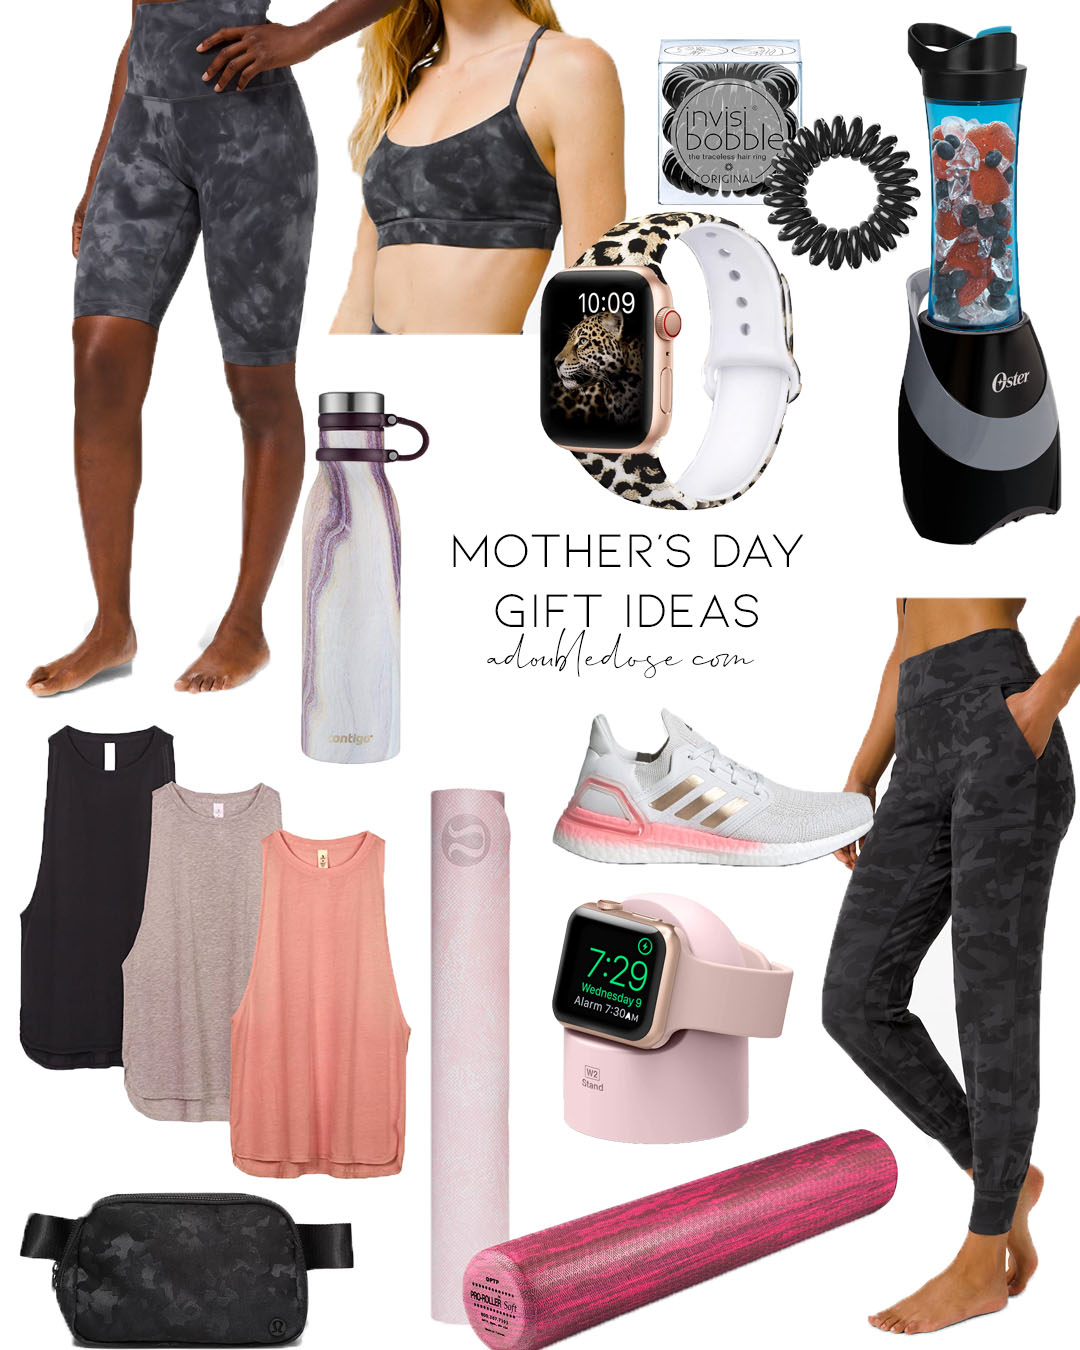 lifestyle and fashion bloggers alexis and samantha belbel share their top and best picks for mother's day gift ideas that are for the fitness lover: yoga mat, sneakers, apple watch band